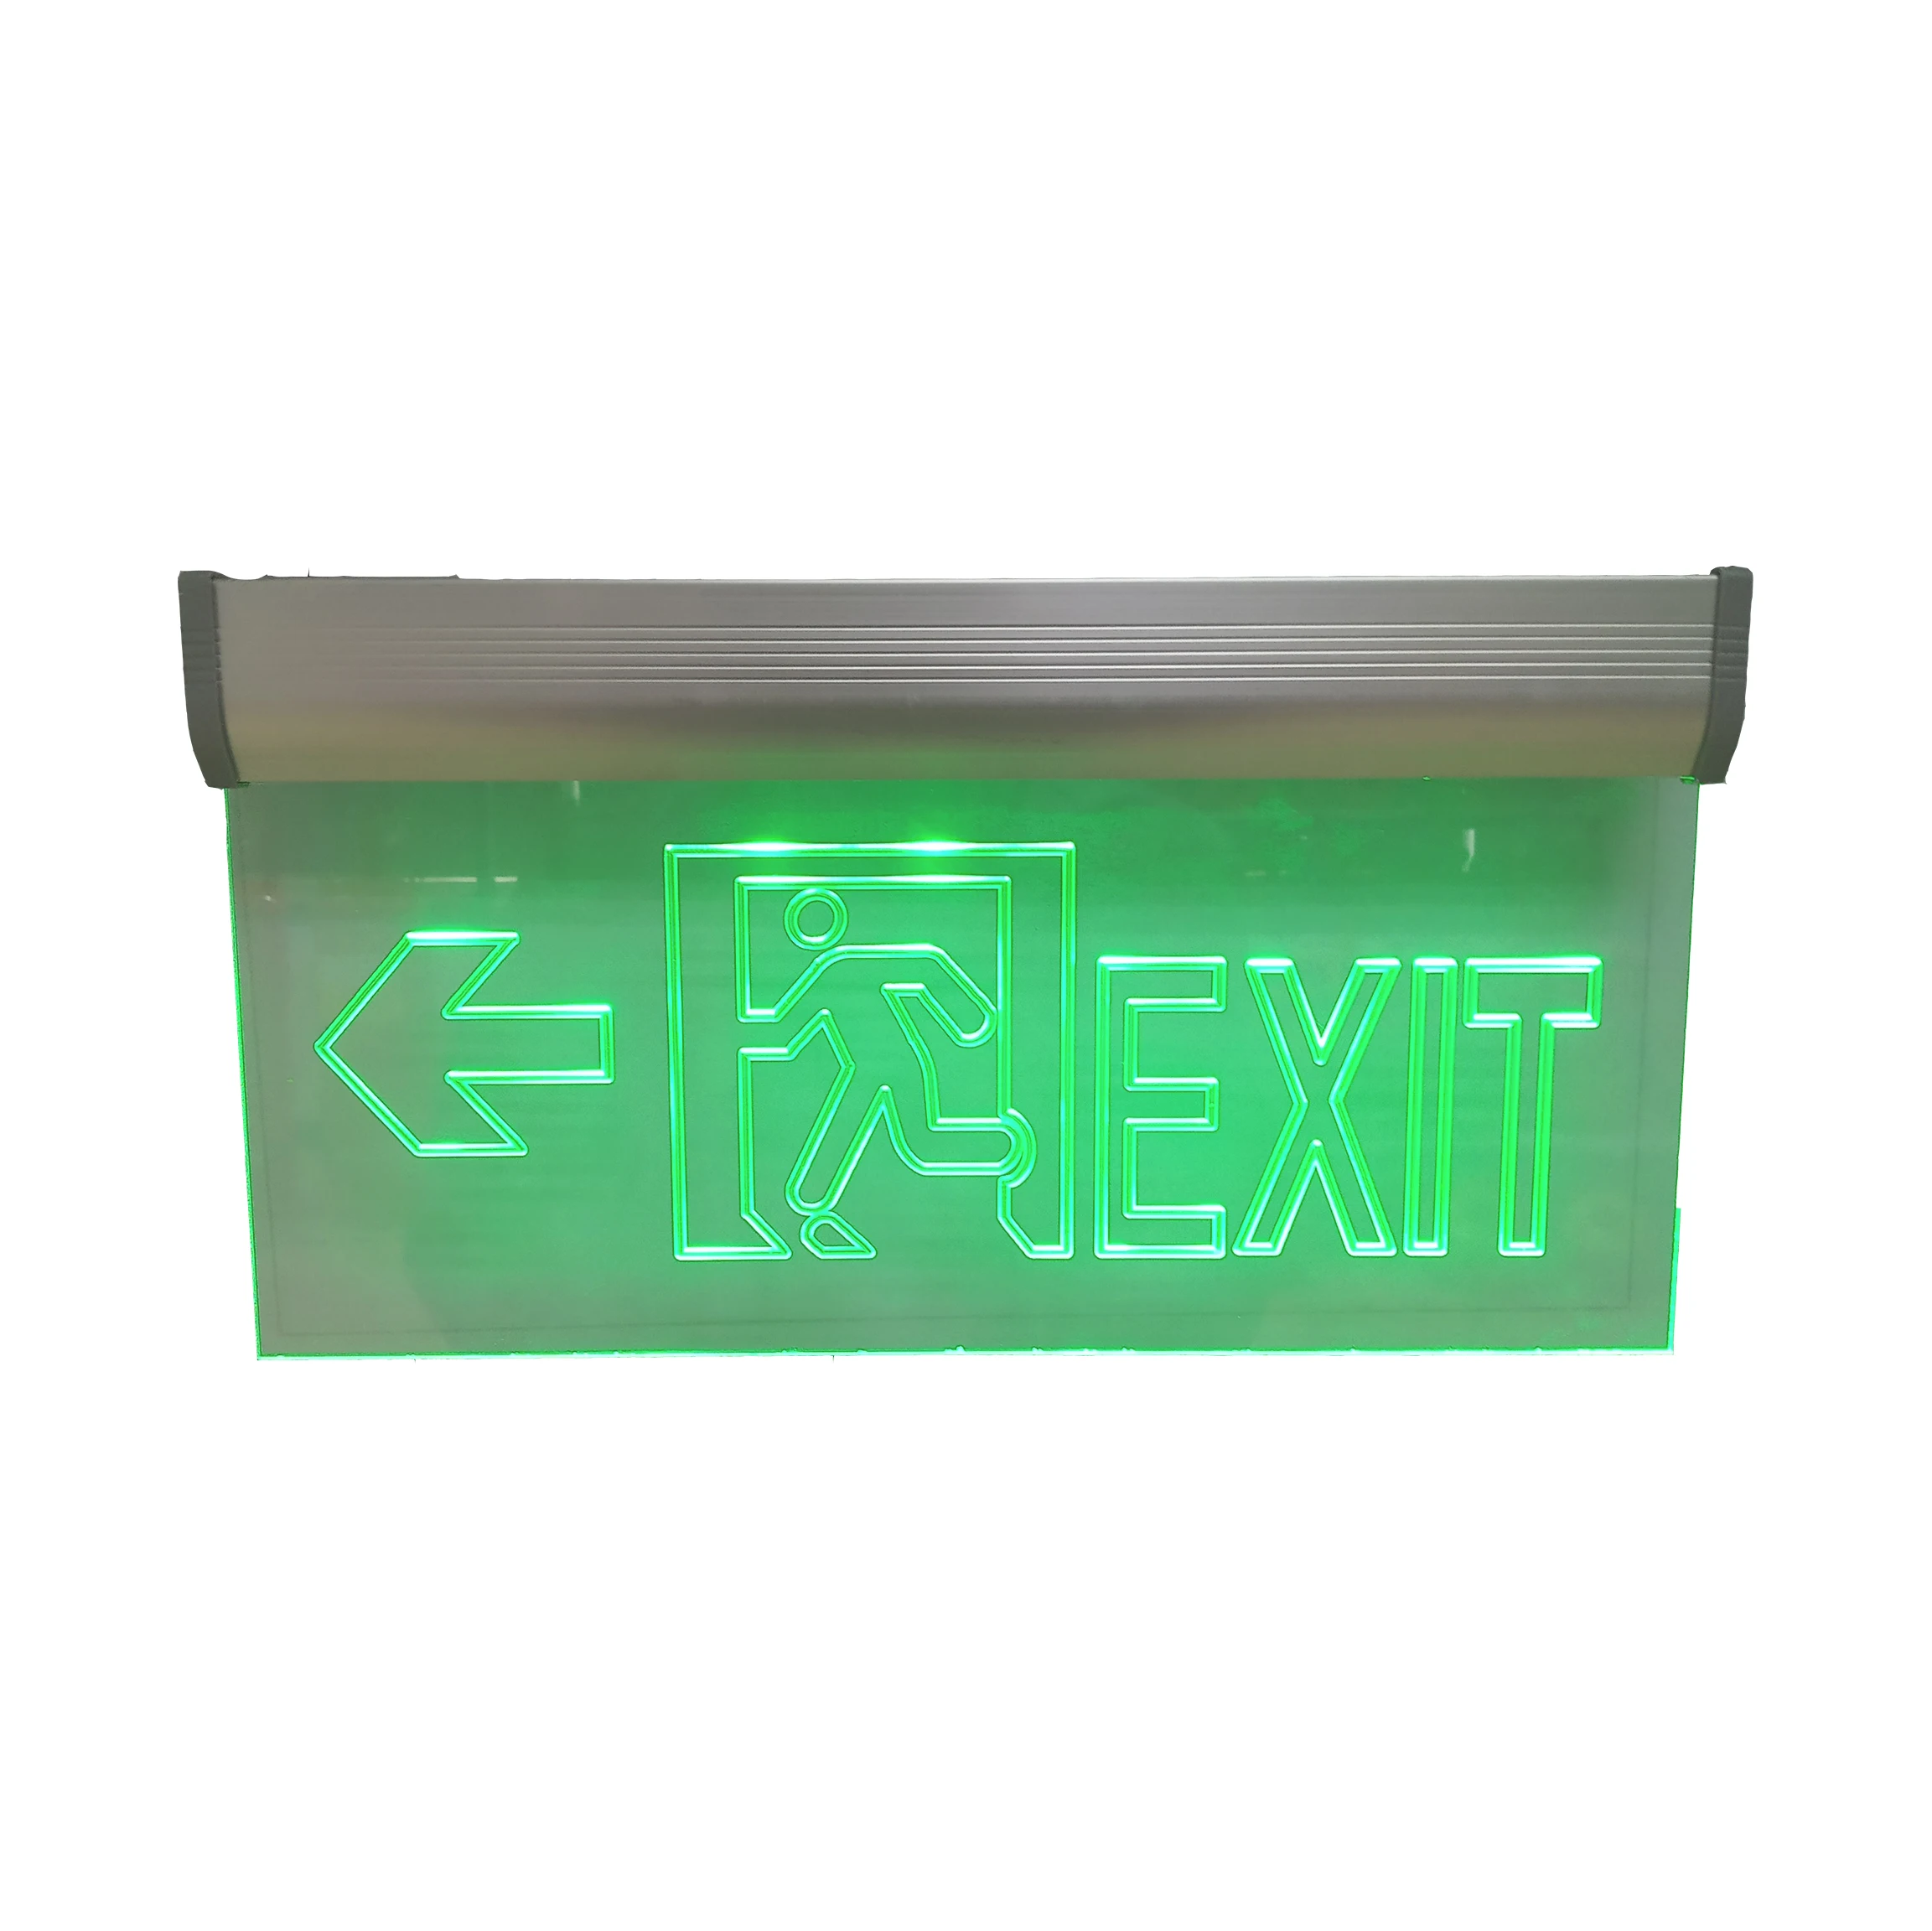 Non Maintained Running Man Emergency Escape Lighted Light rechargeable Acrylic Pane Led Exit Sign